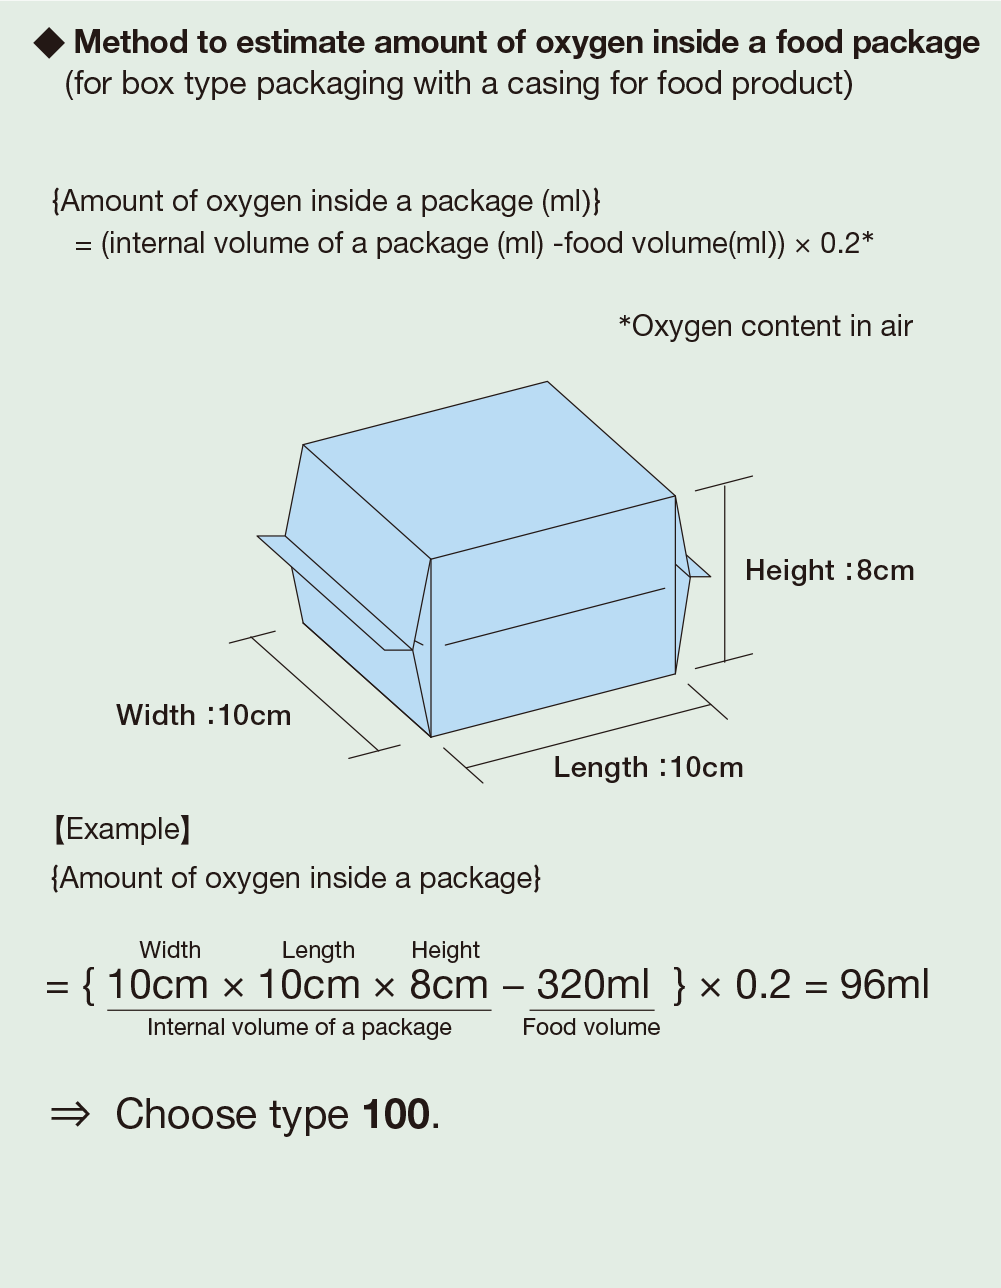 Method for estimating the amount of oxygen in food packaging